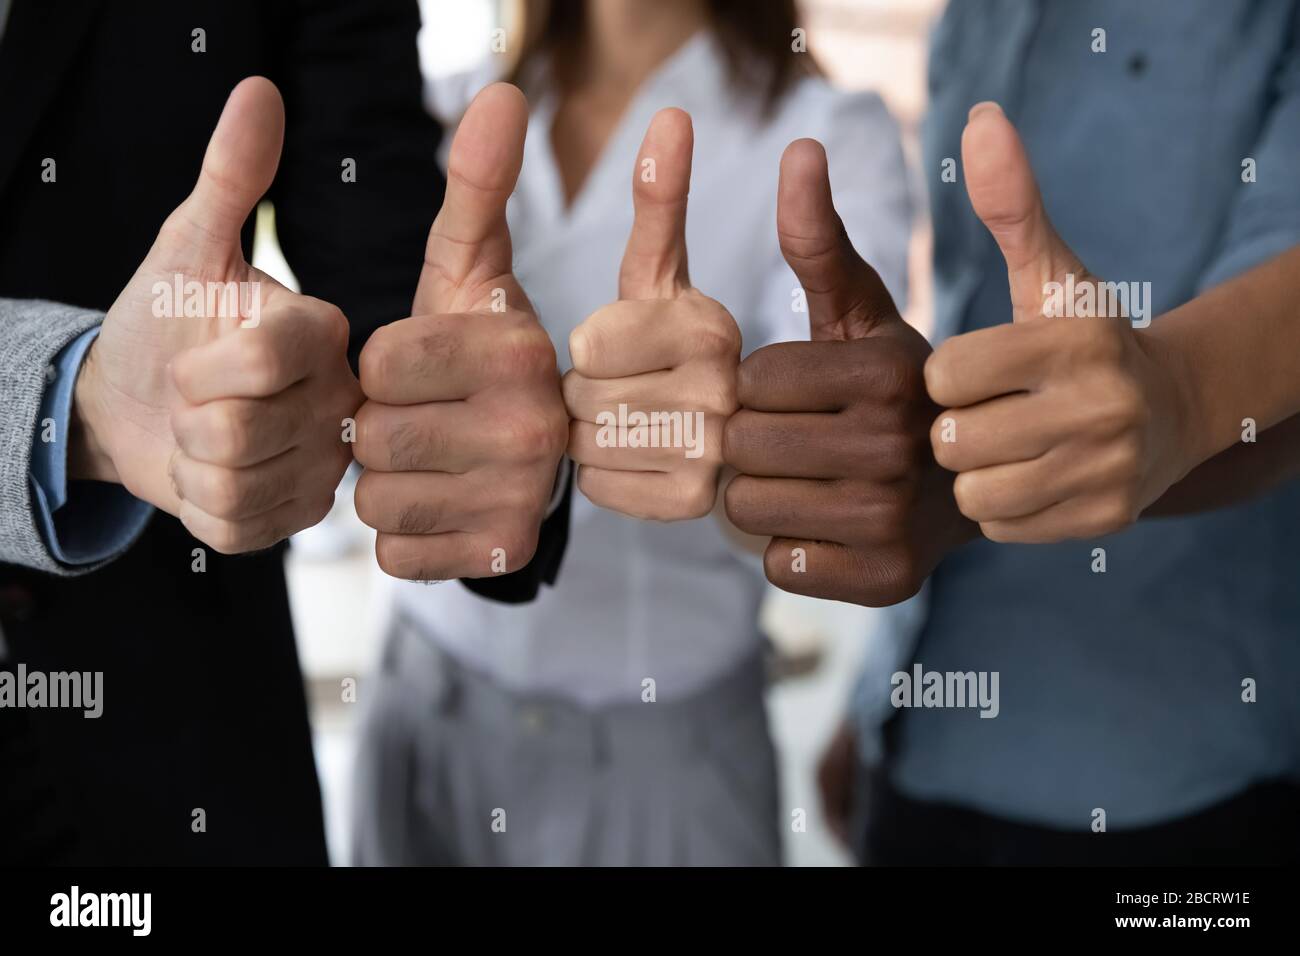 Diverse business team people hands showing thumbs up. Stock Photo